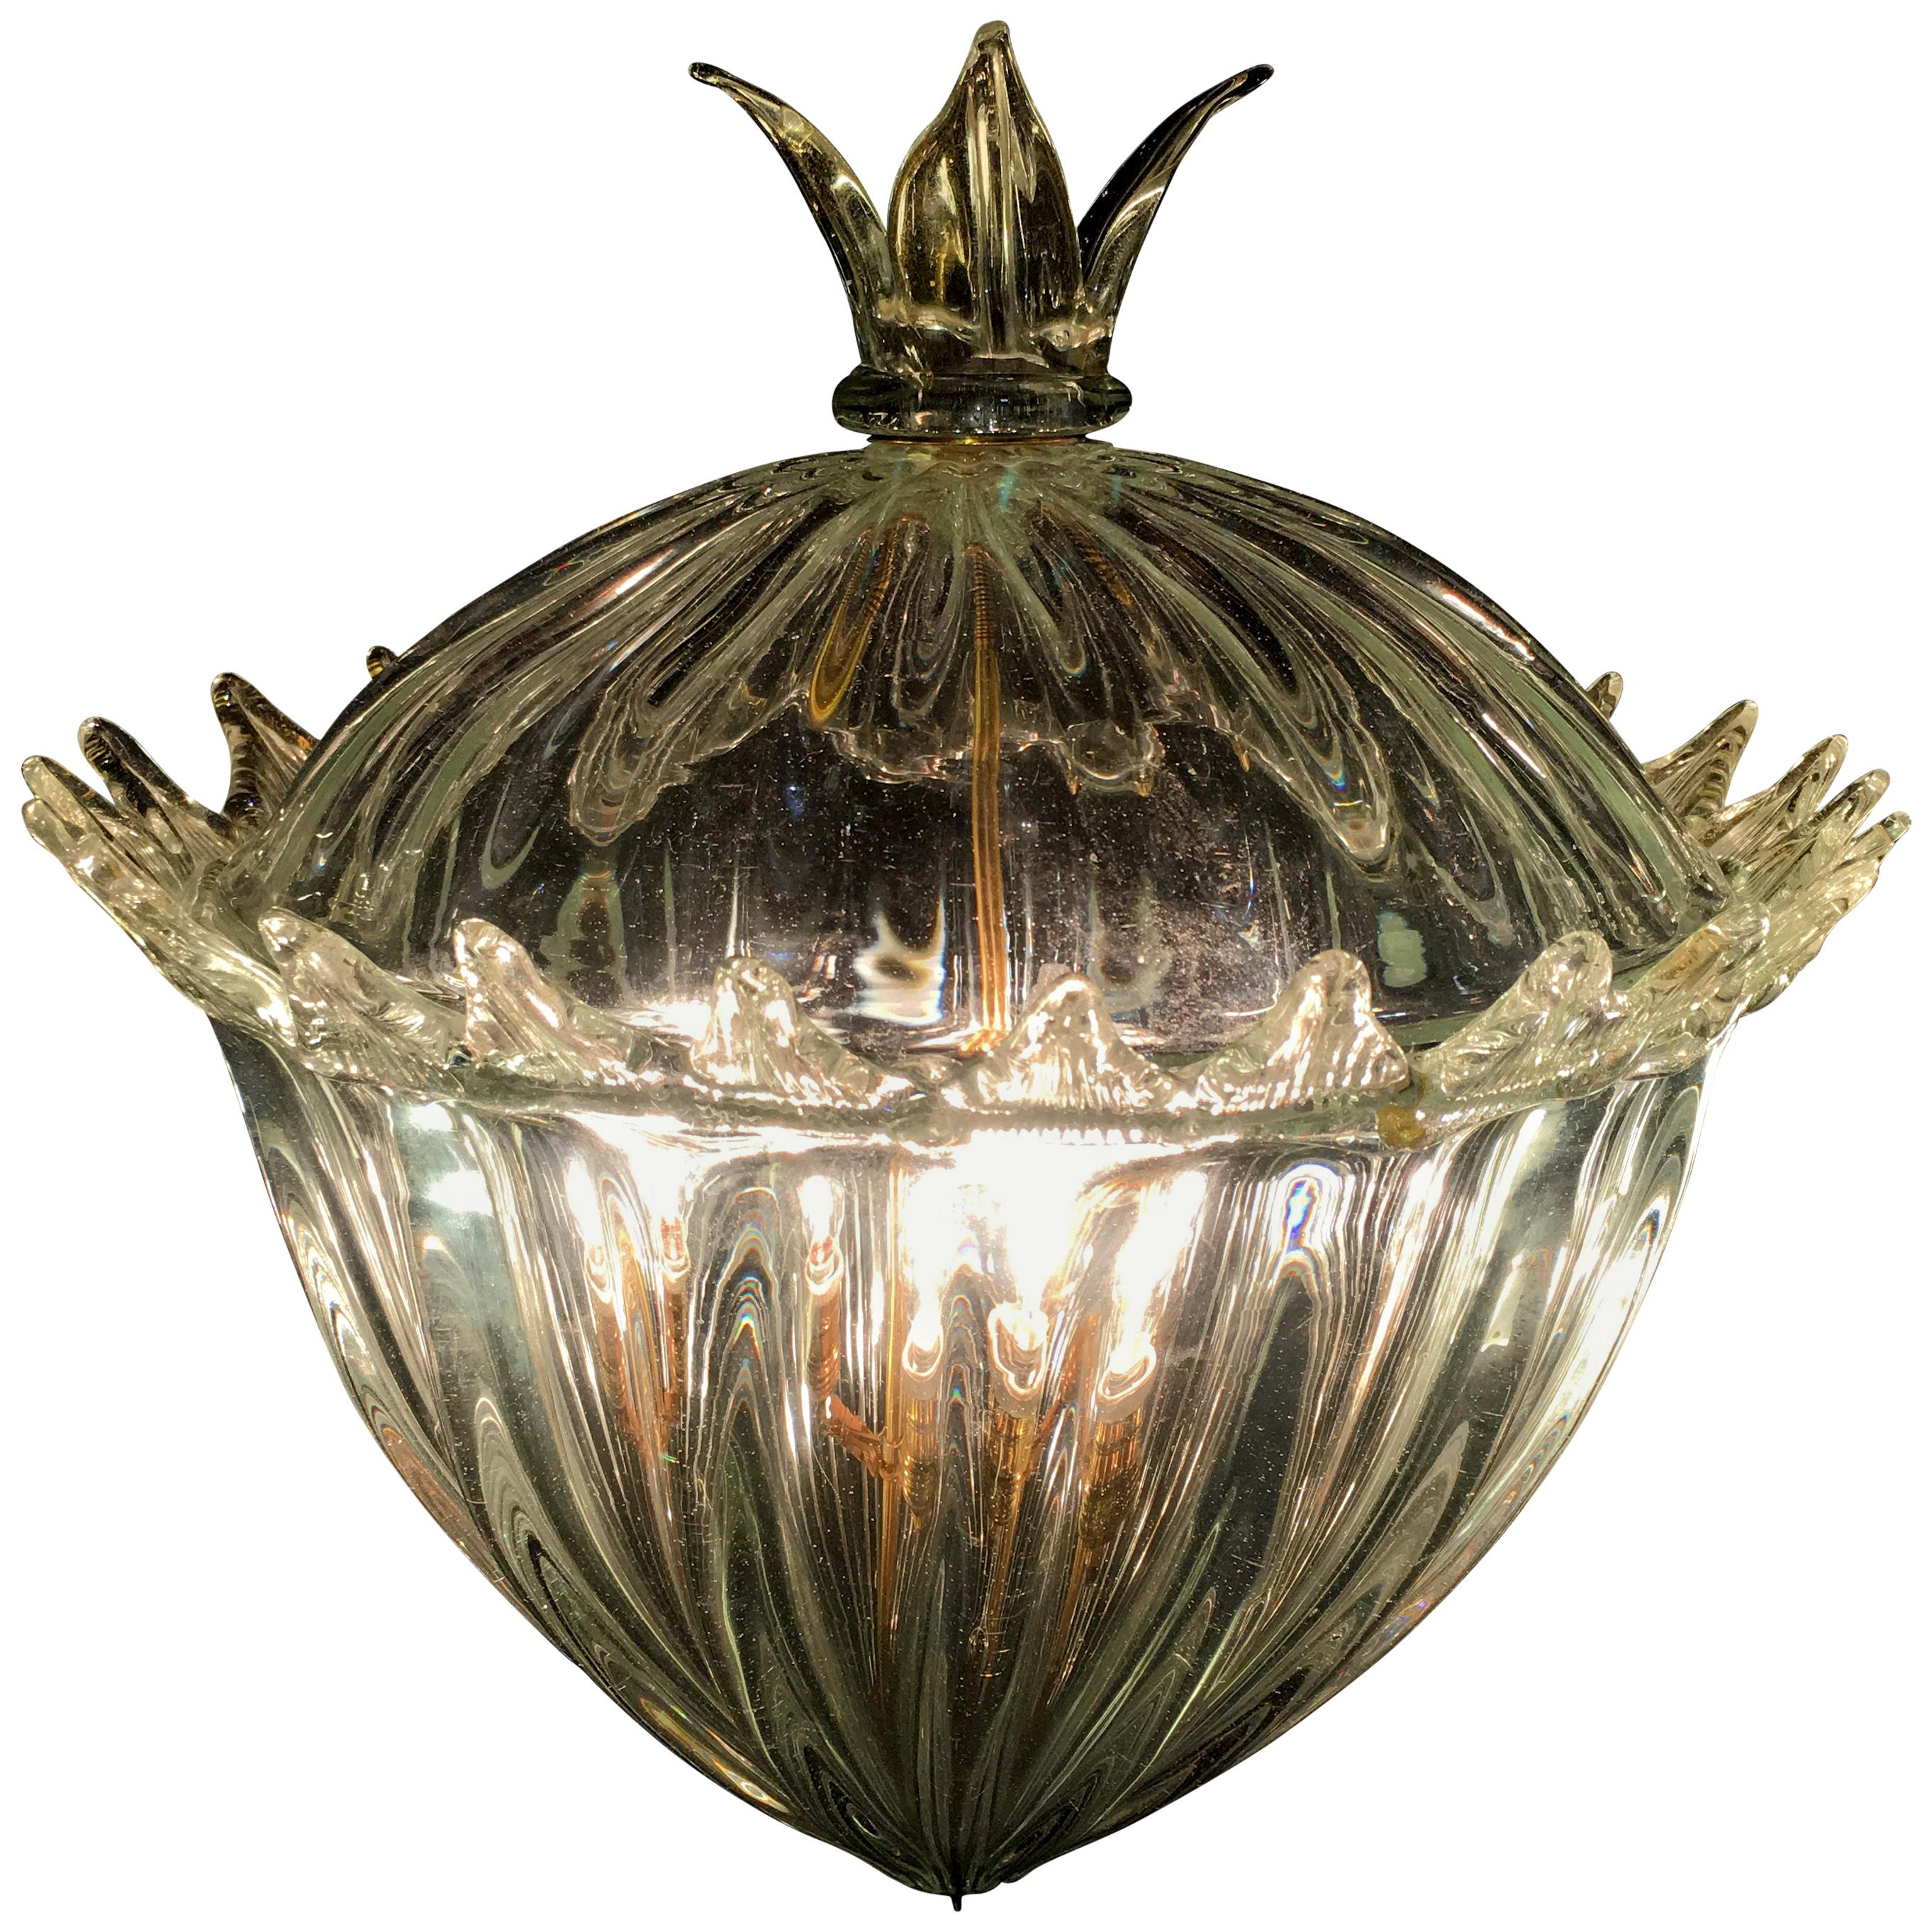 Chandelier Lantern "The Queen Mother" by Barovier & Toso. Murano, 1940s